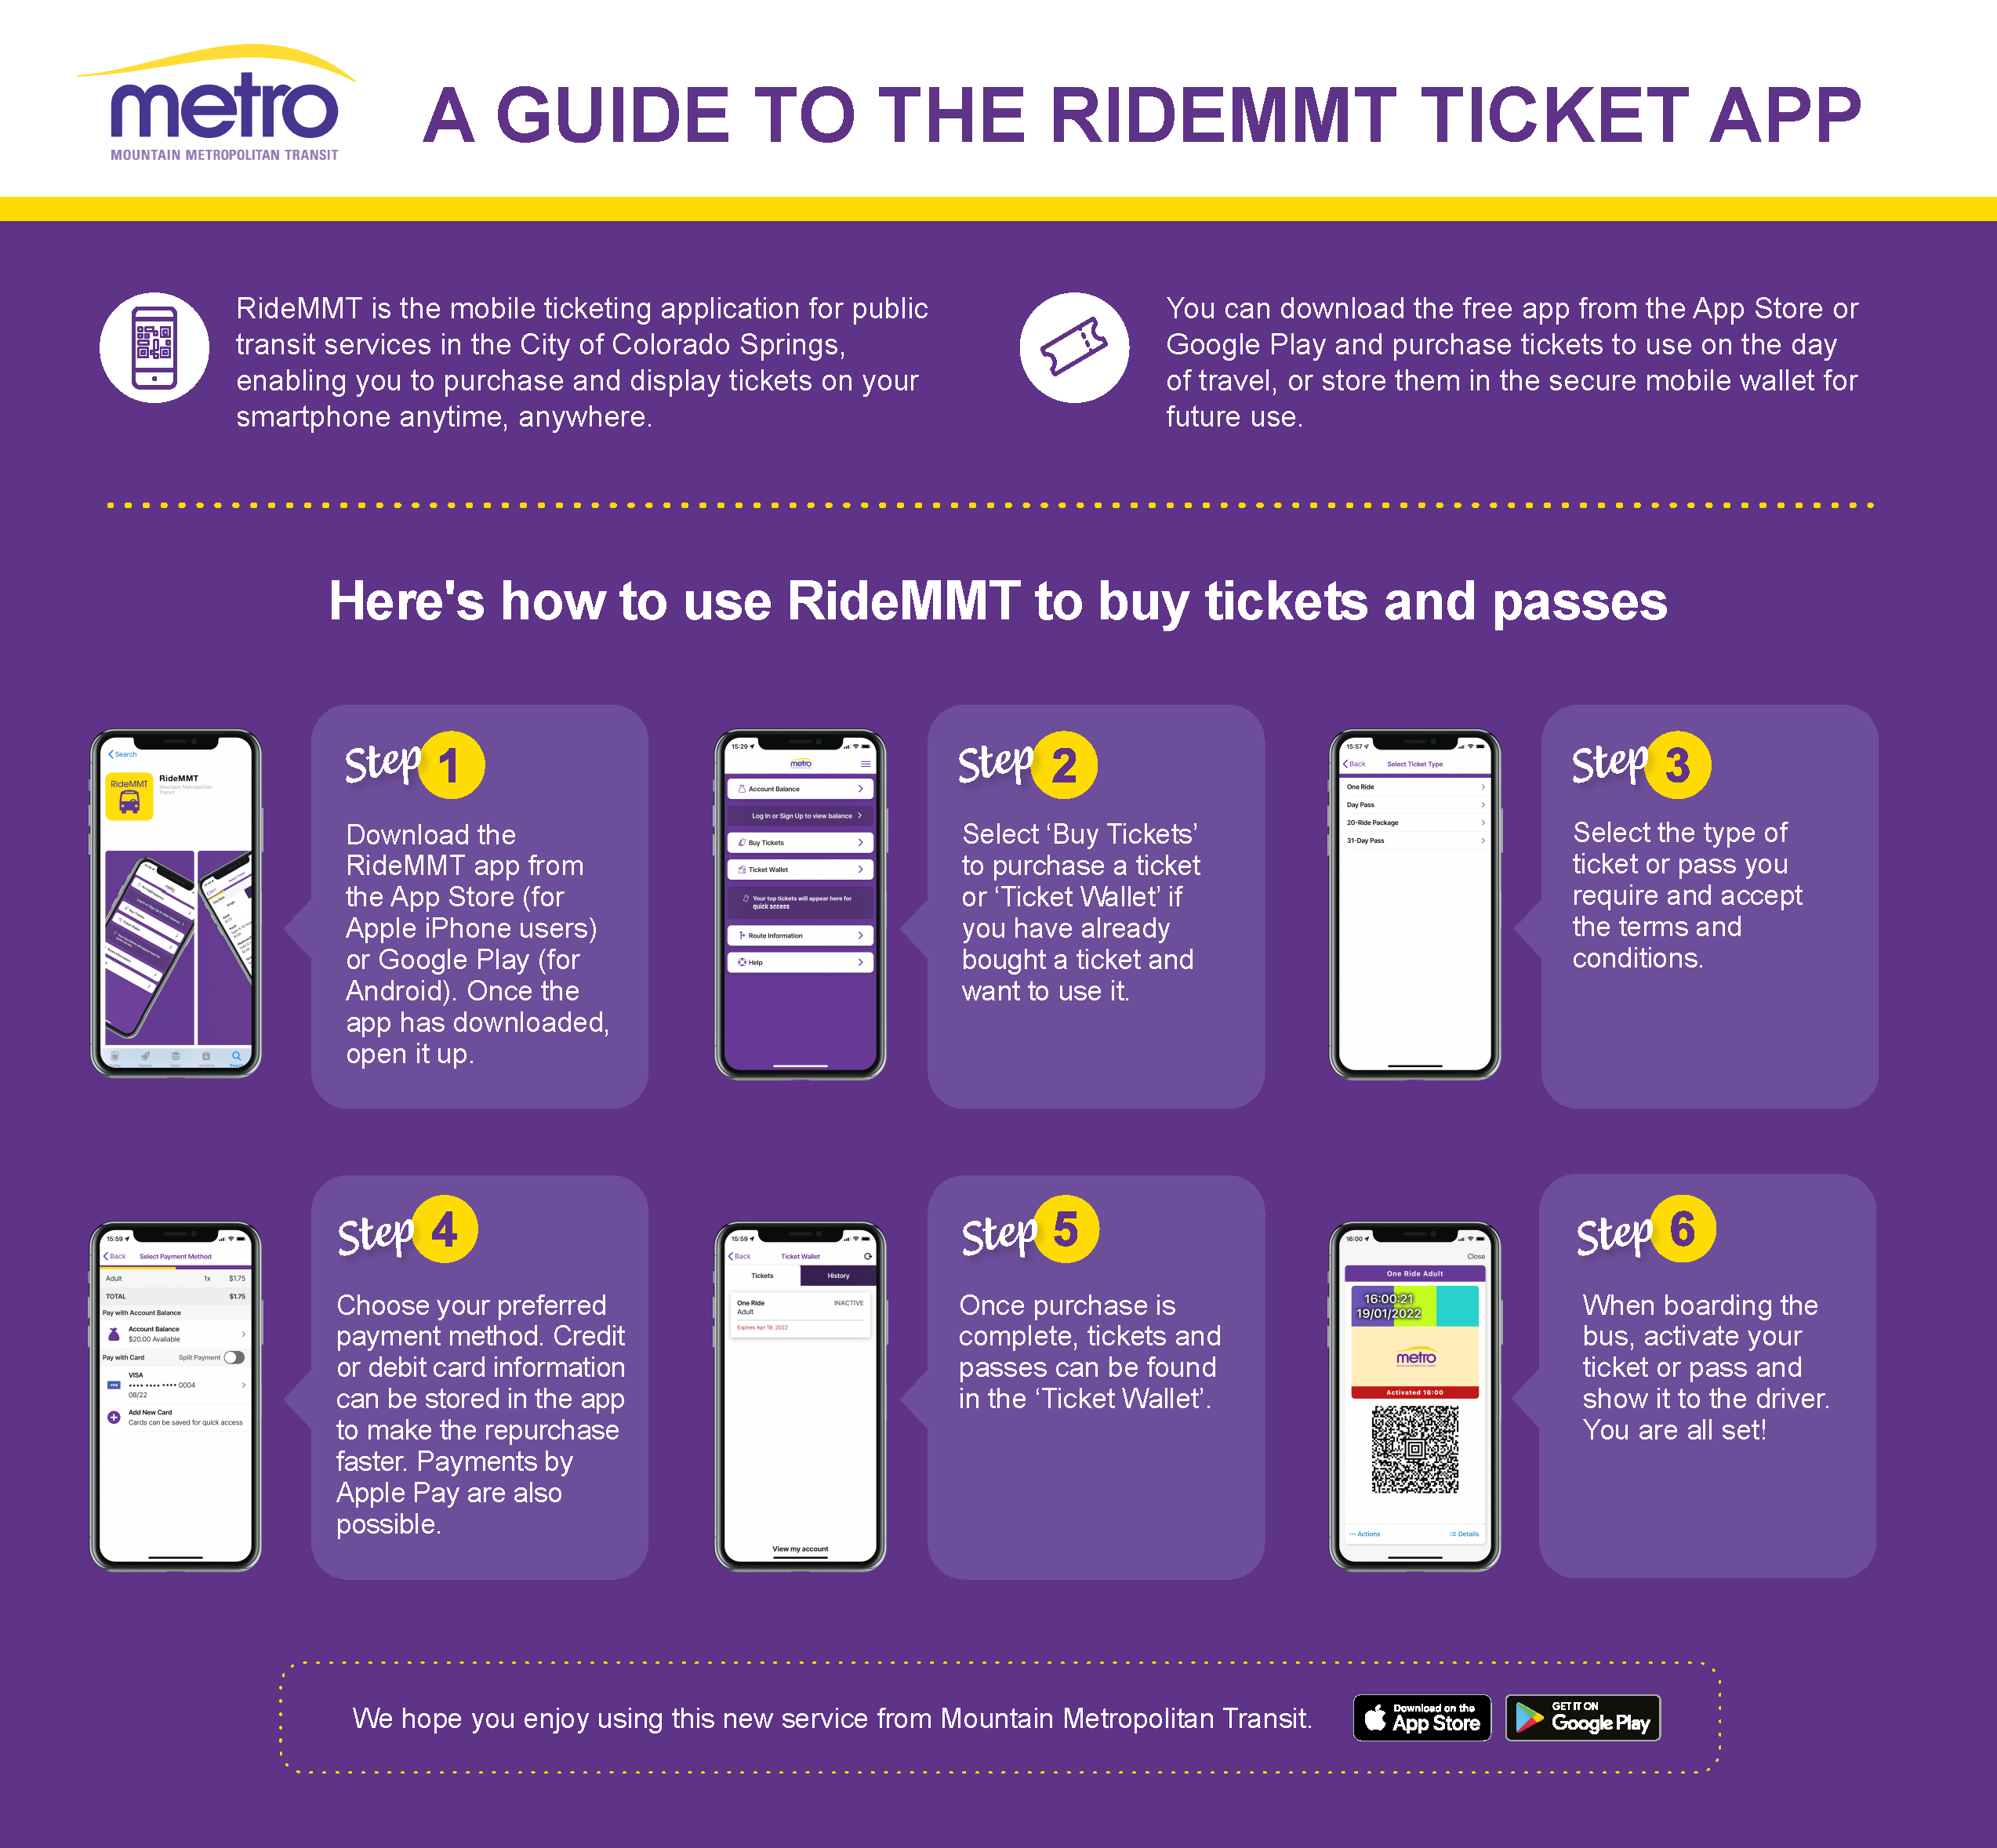 a guide to the ride mmt ticket app. written version below the image